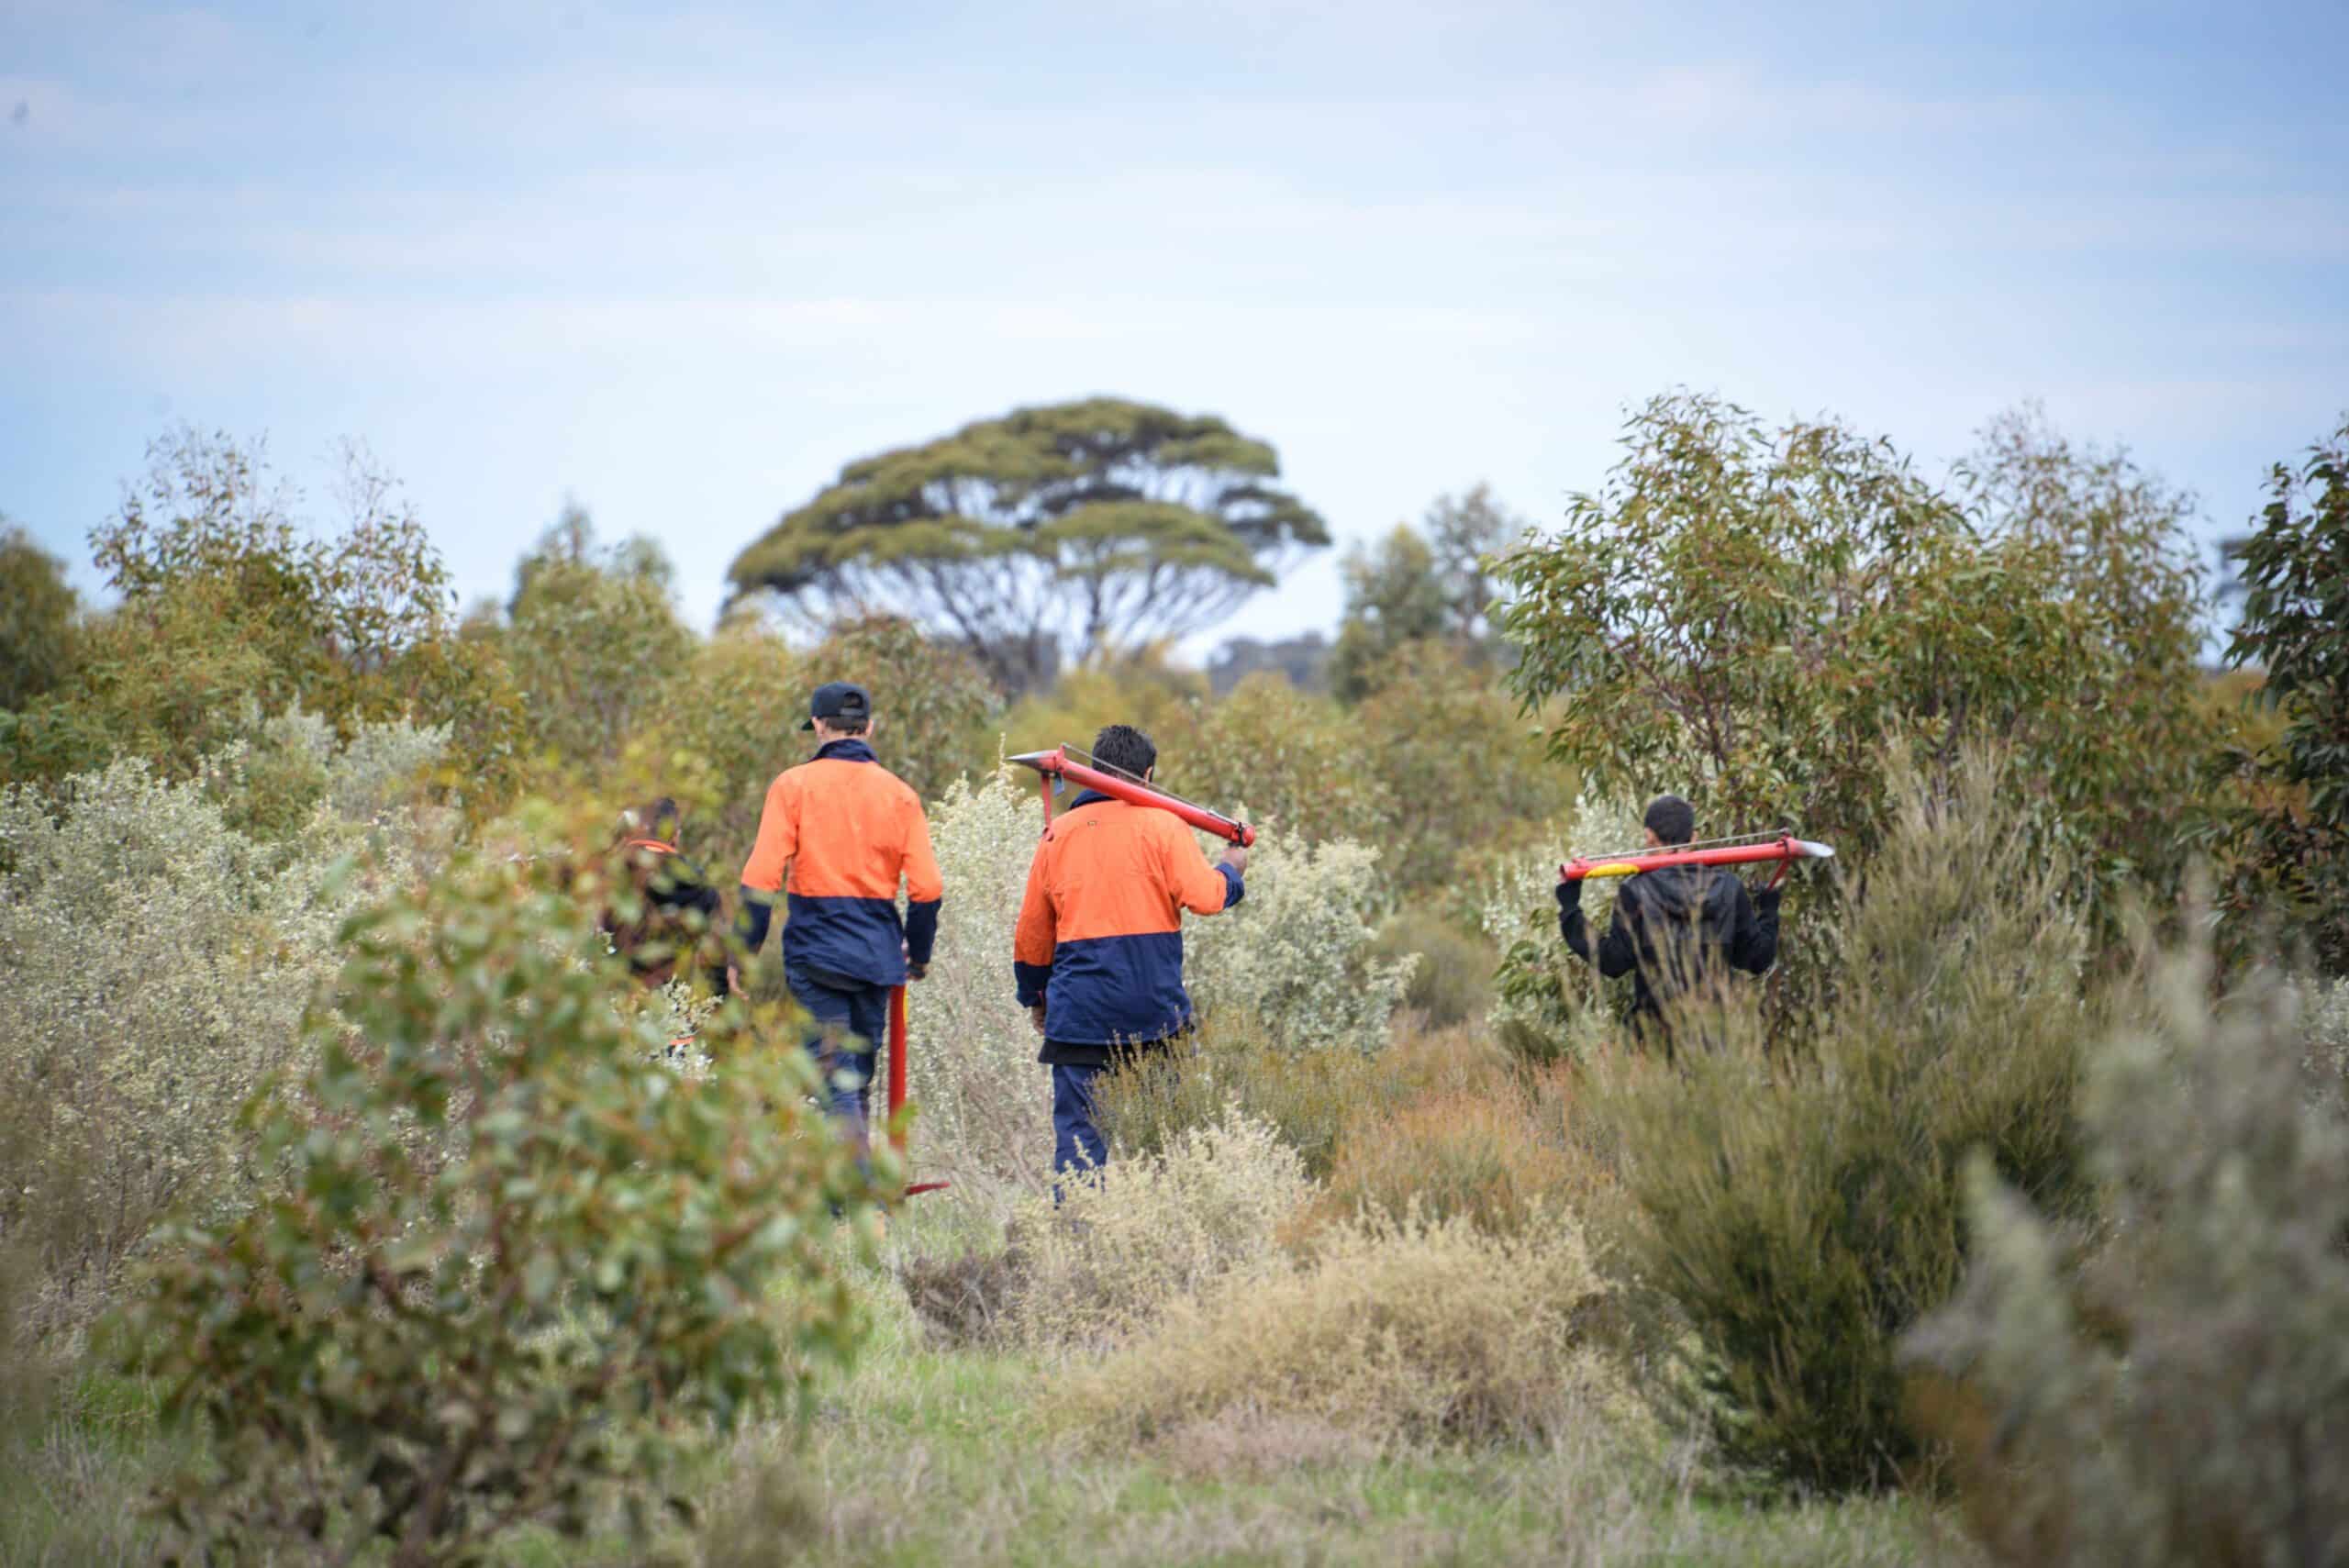 COP15 Biodiversity Summit took into consideration traditional owners, like the Nyoongar Rangers on site at Badgebup.